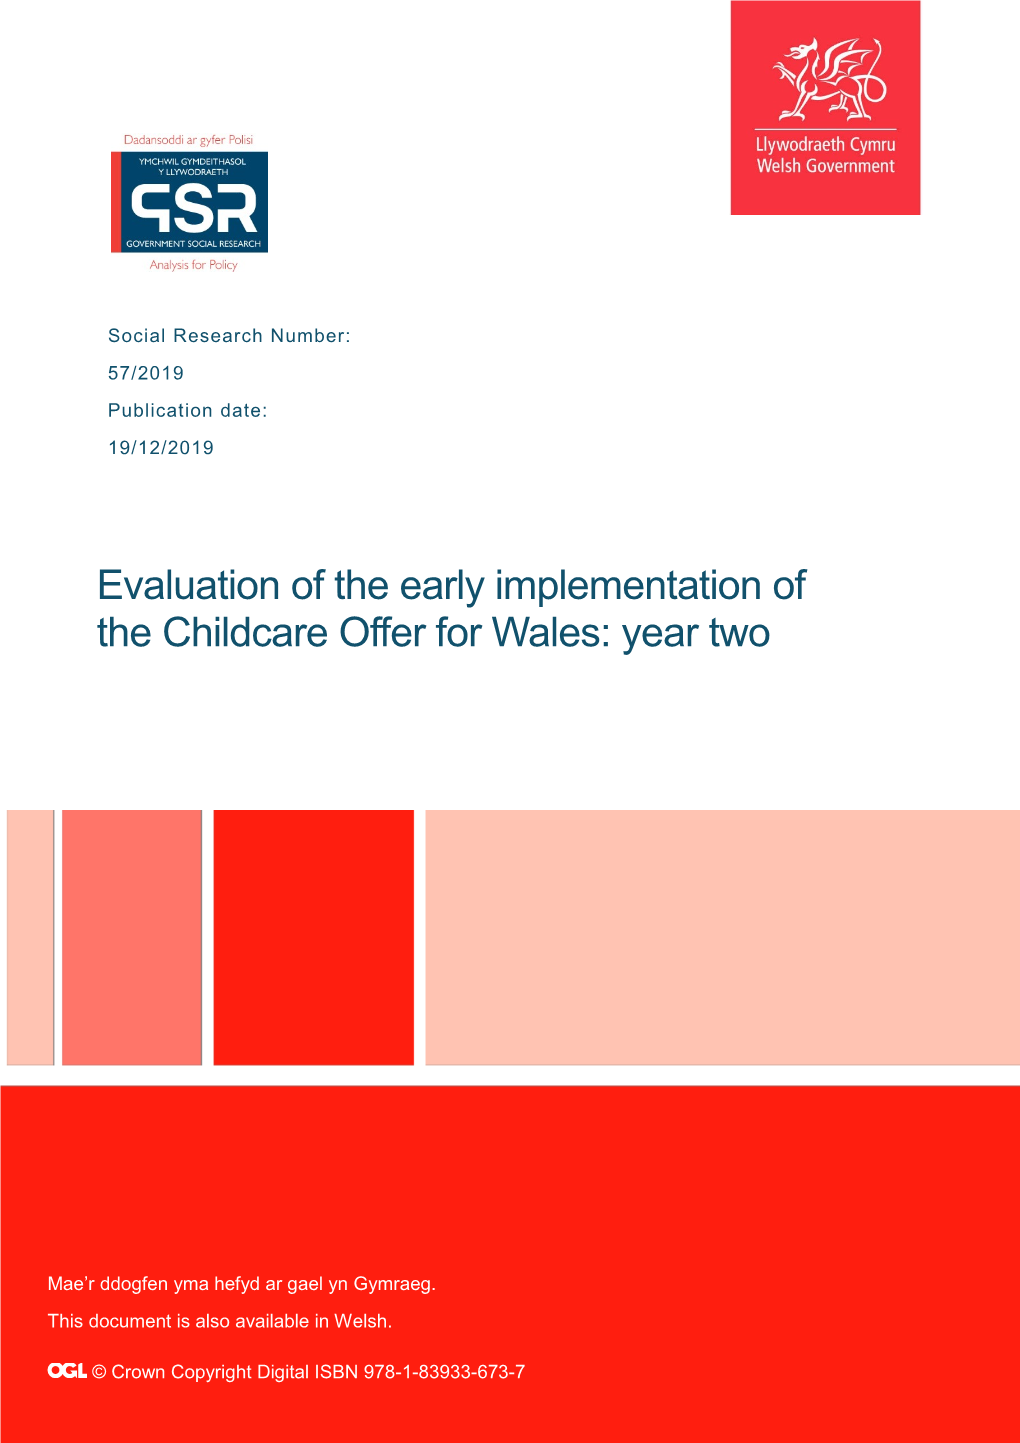 Evaluation of the Early Implementation of the Childcare Offer for Wales: Year Two